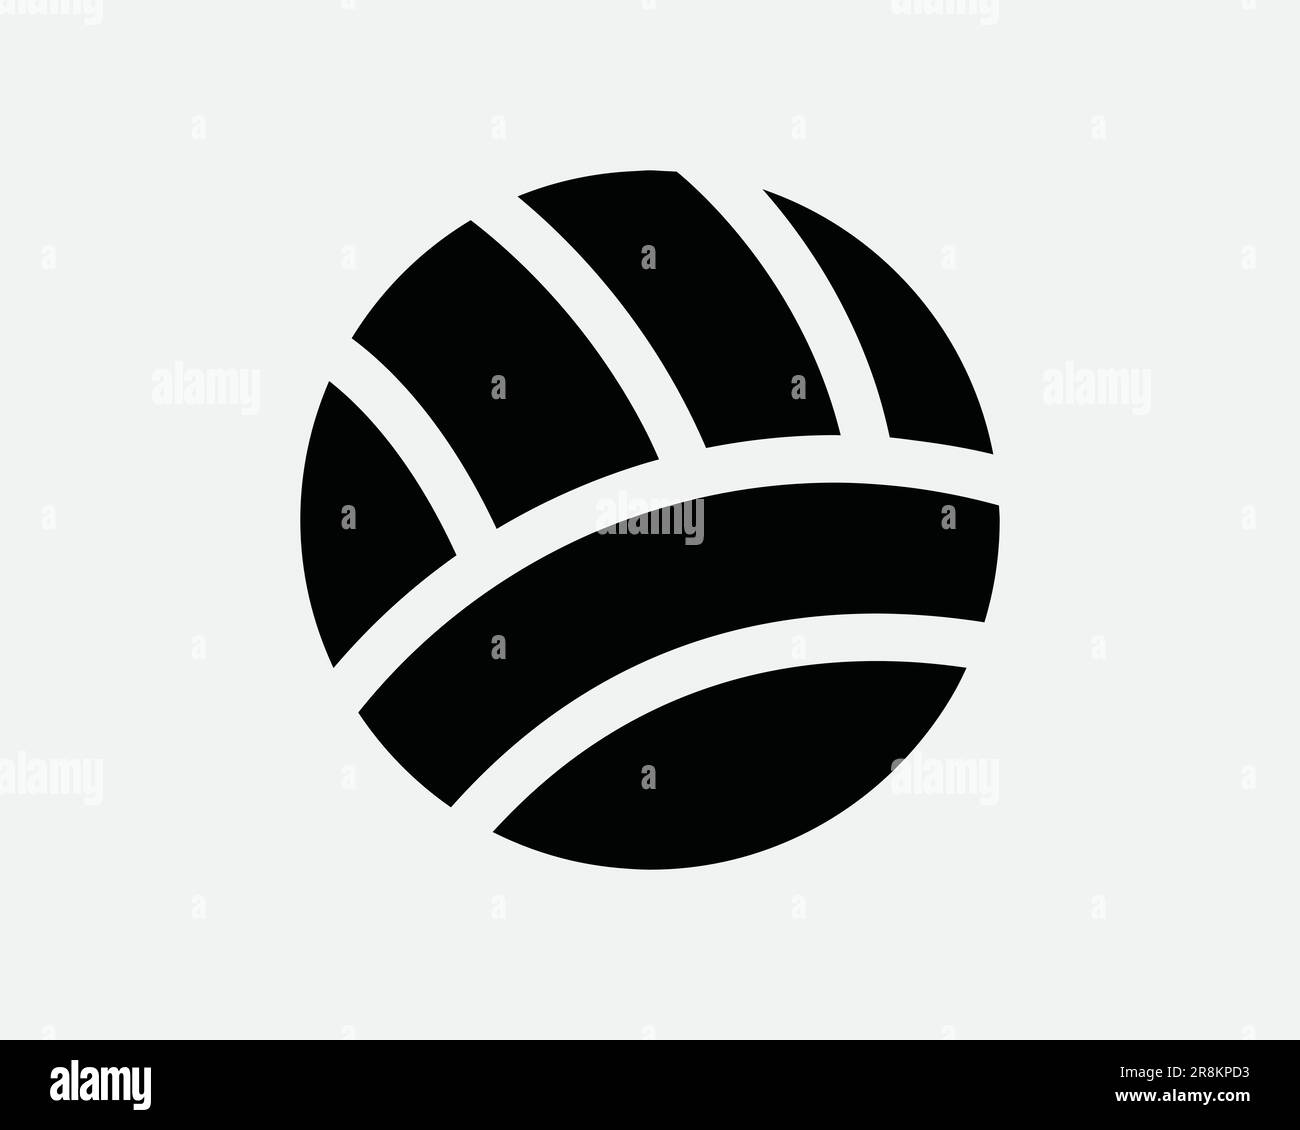 Volleyball Icon. Netball Game Sport Competition Play Exercise Round Sphere. Black White Sign Symbol Illustration Artwork Graphic Clipart EPS Vector Stock Vector